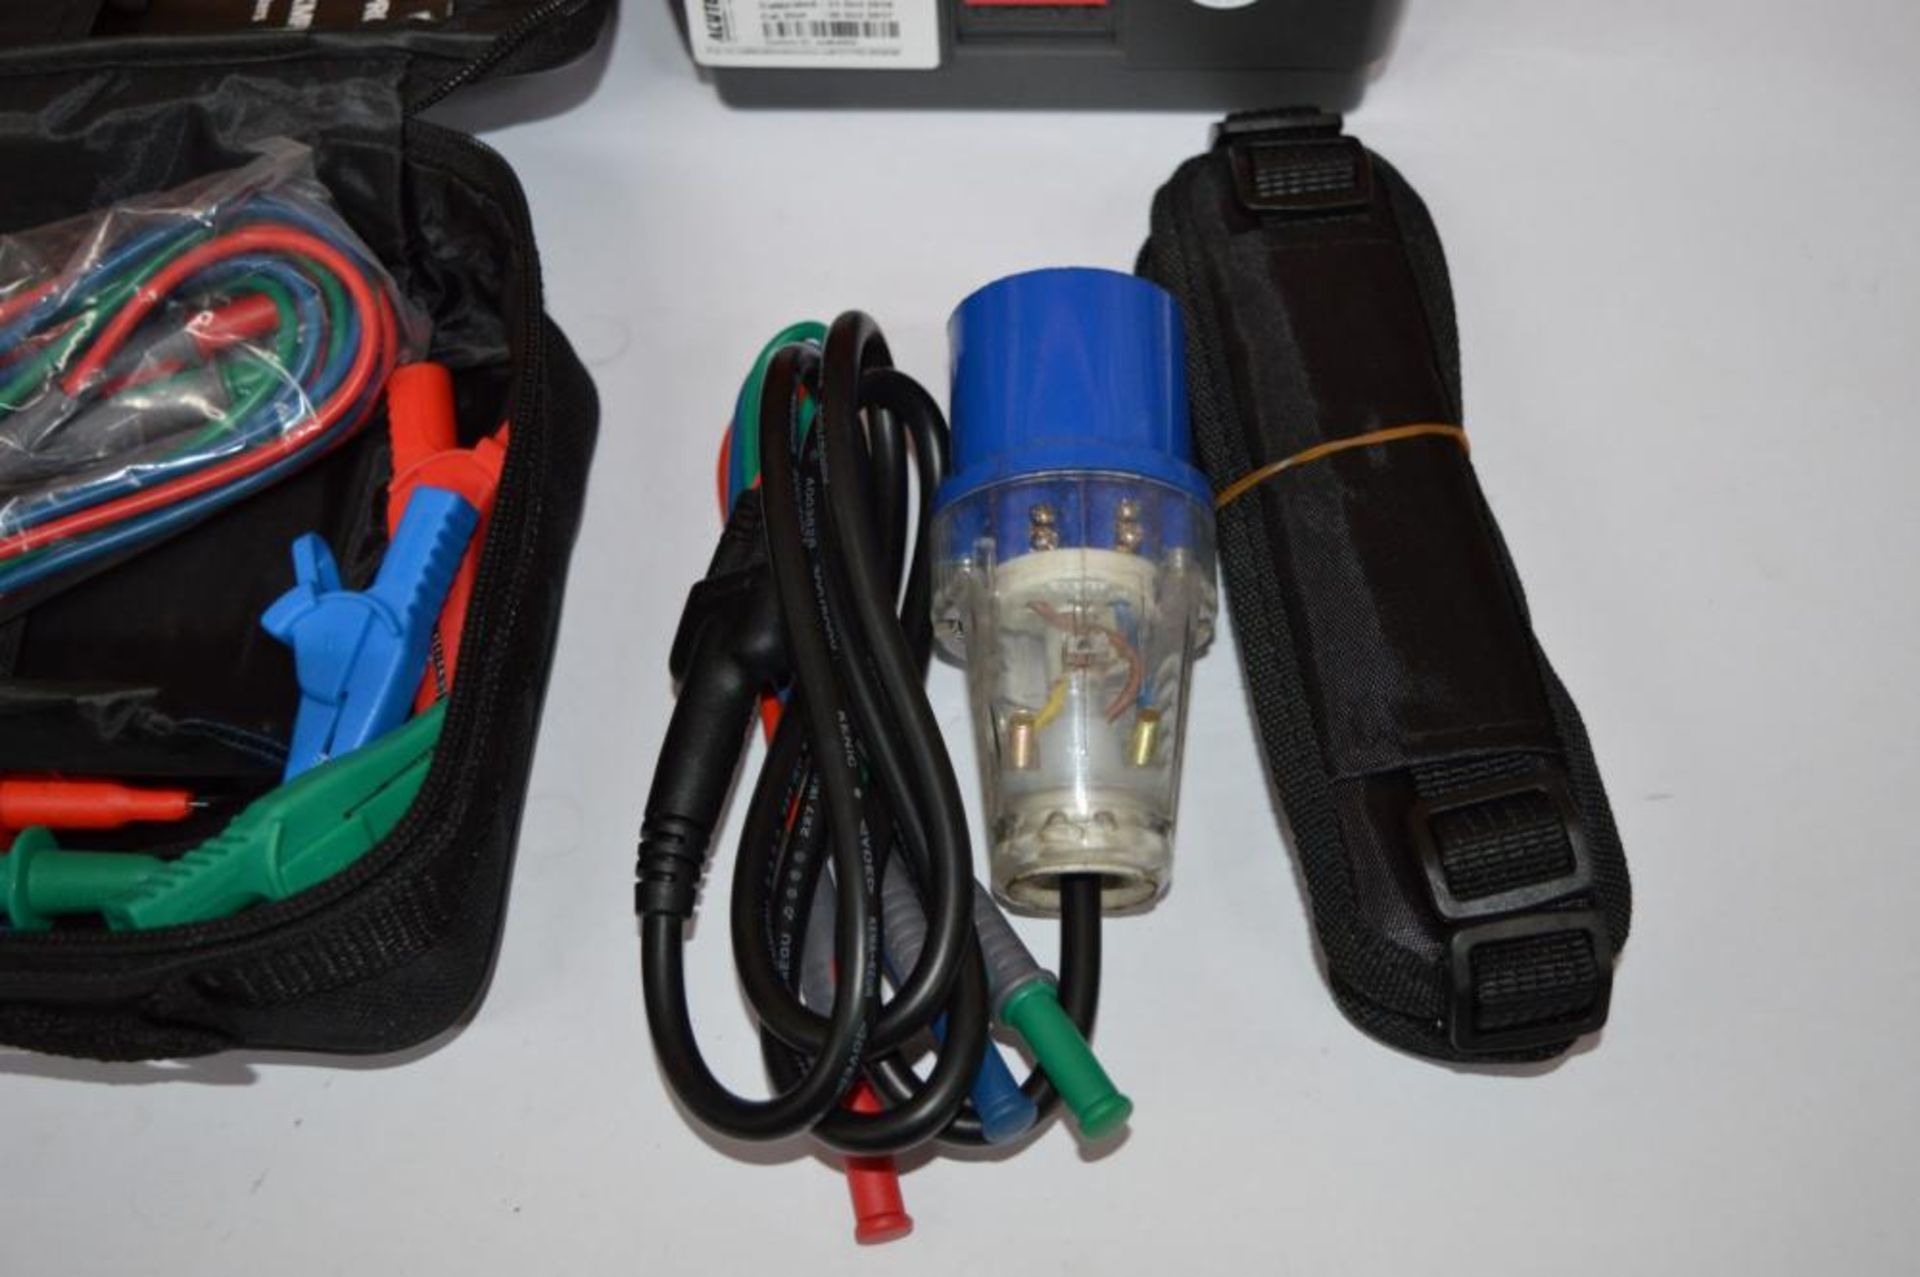 1 x Robin Amprobe Digital RCD Tester With Fast Trip - Model KMP7020 - Boxed With All Accessories - C - Image 2 of 12